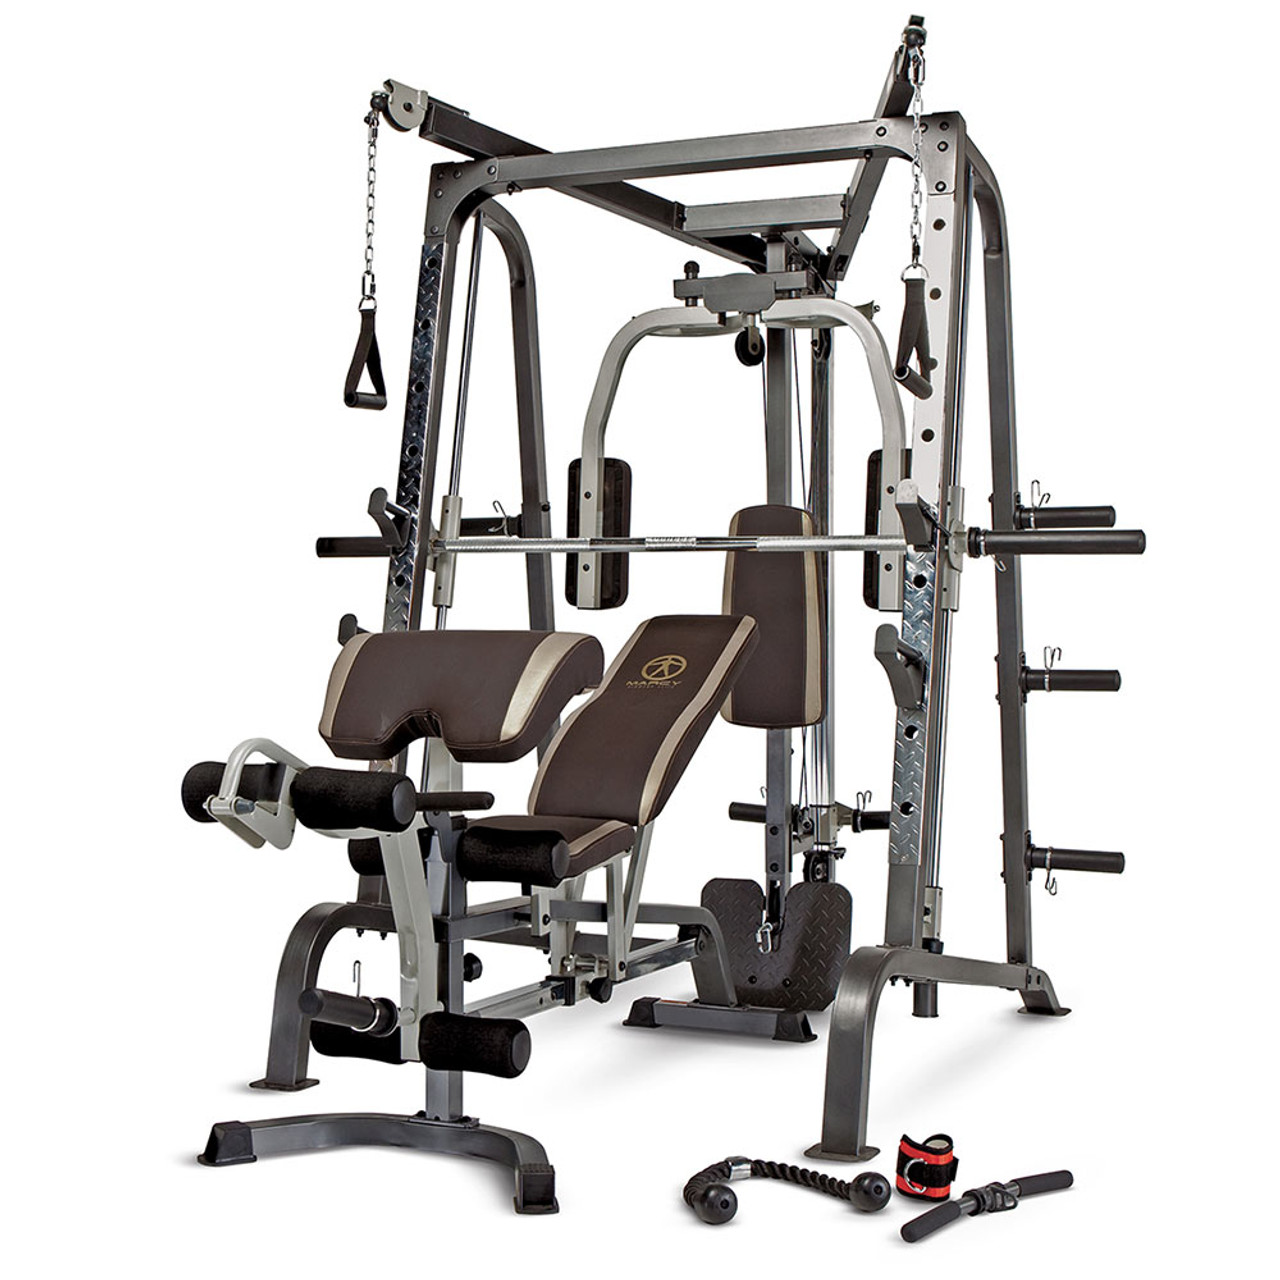 Quality Home Fitness & Exercise Equipment